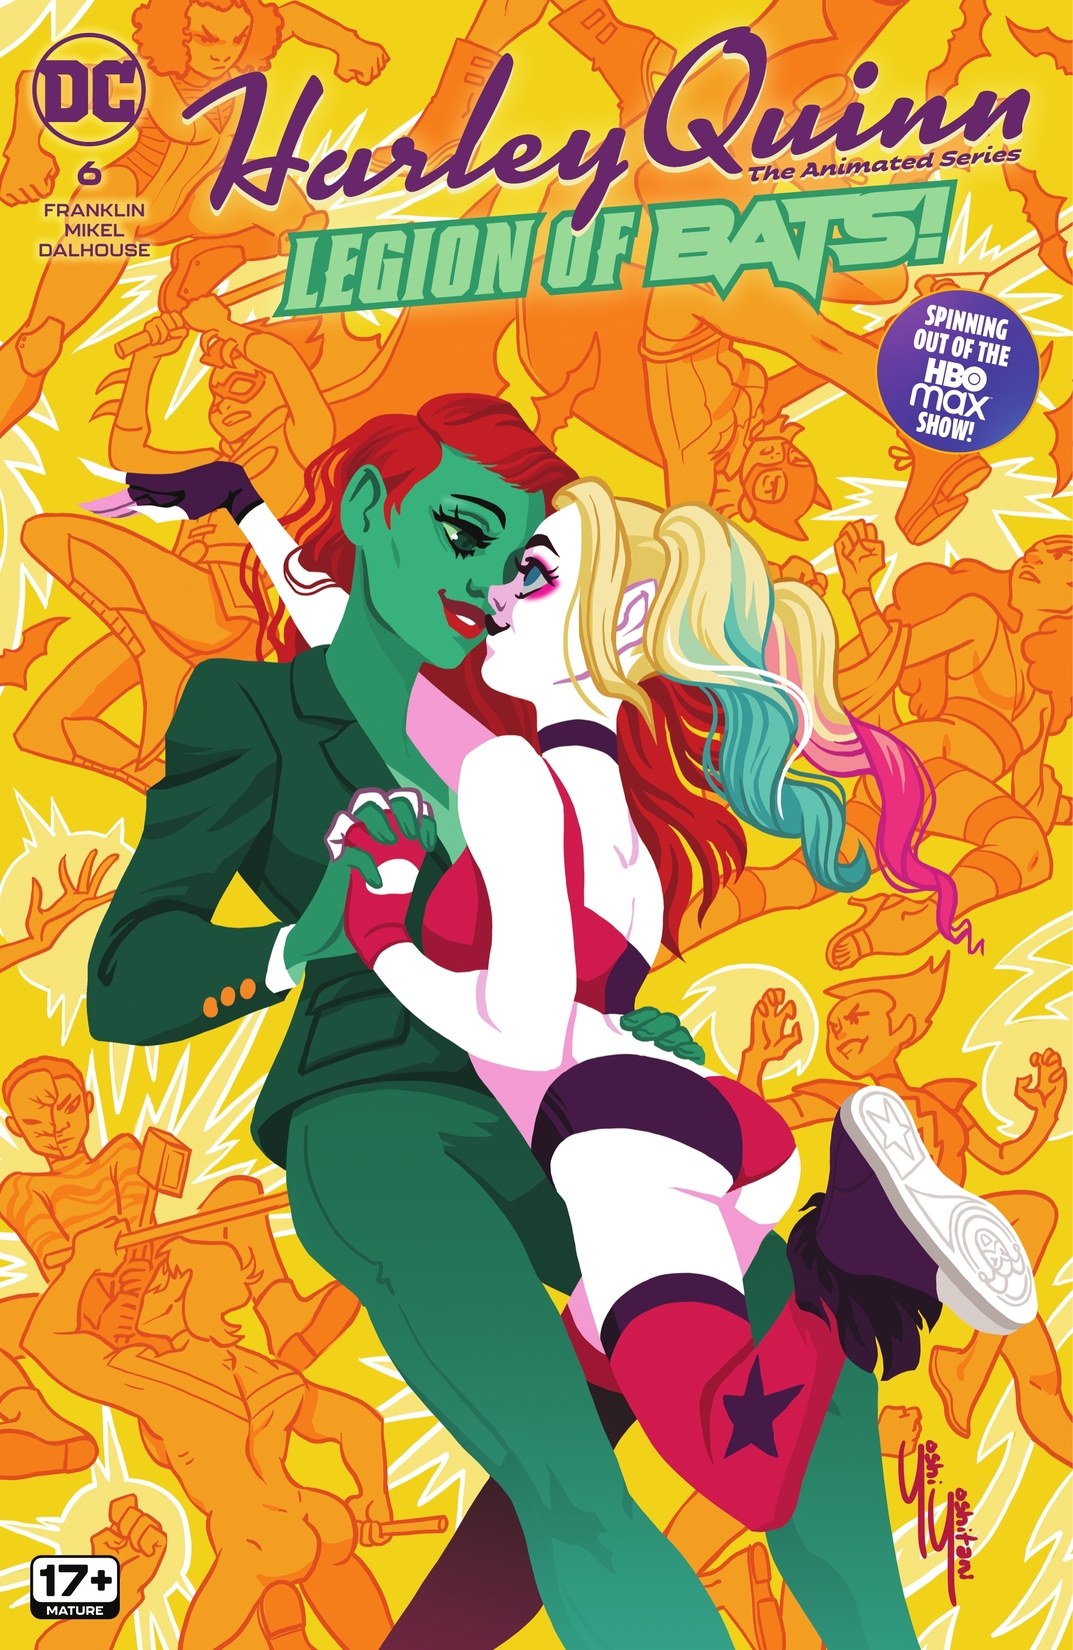 Harley Quinn: The Animated Series: Legion of Bats! #6 preview images